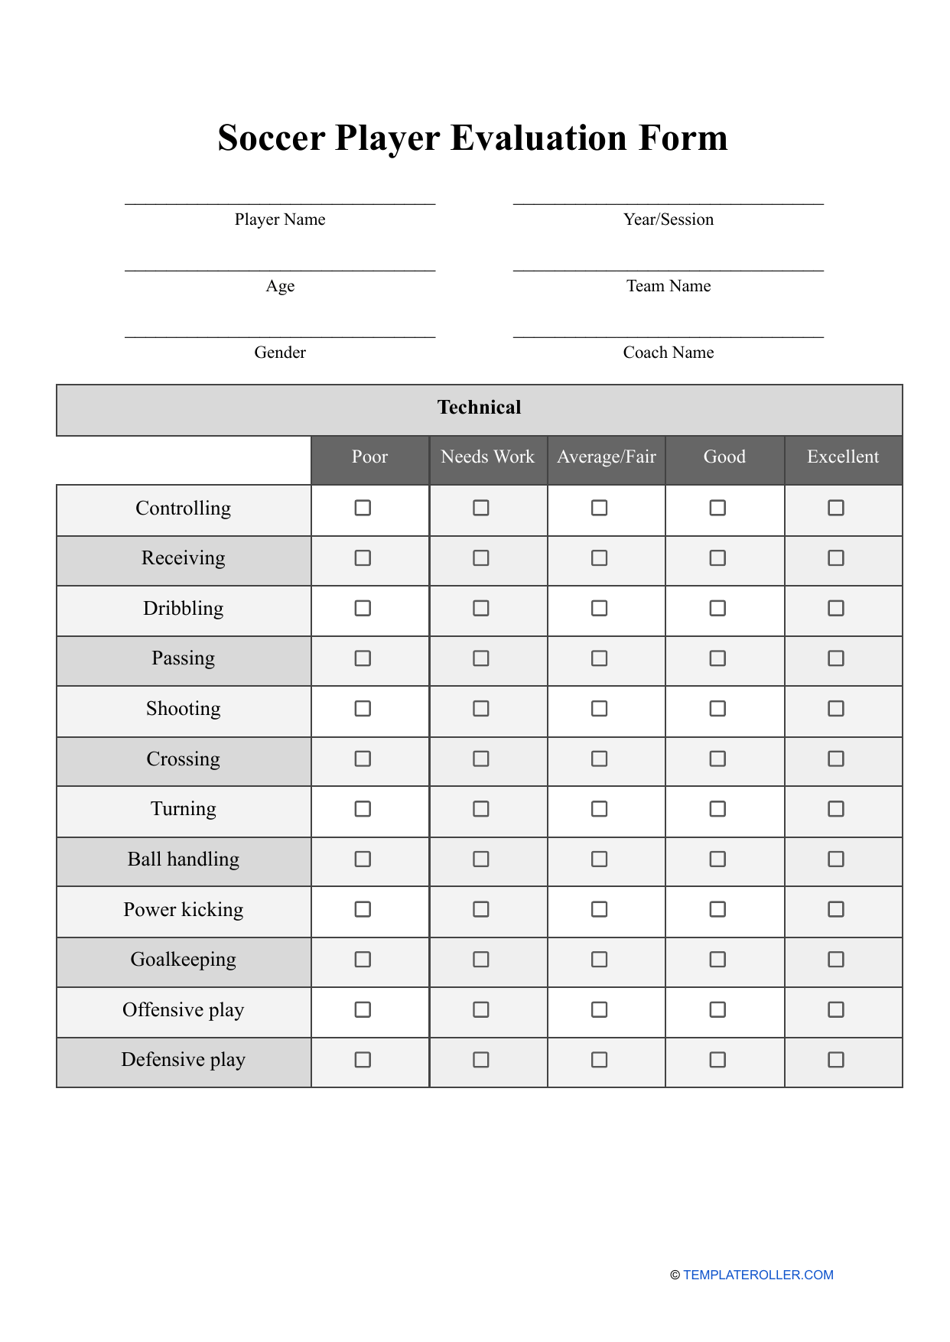 Soccer Player Evaluation Form, Page 1